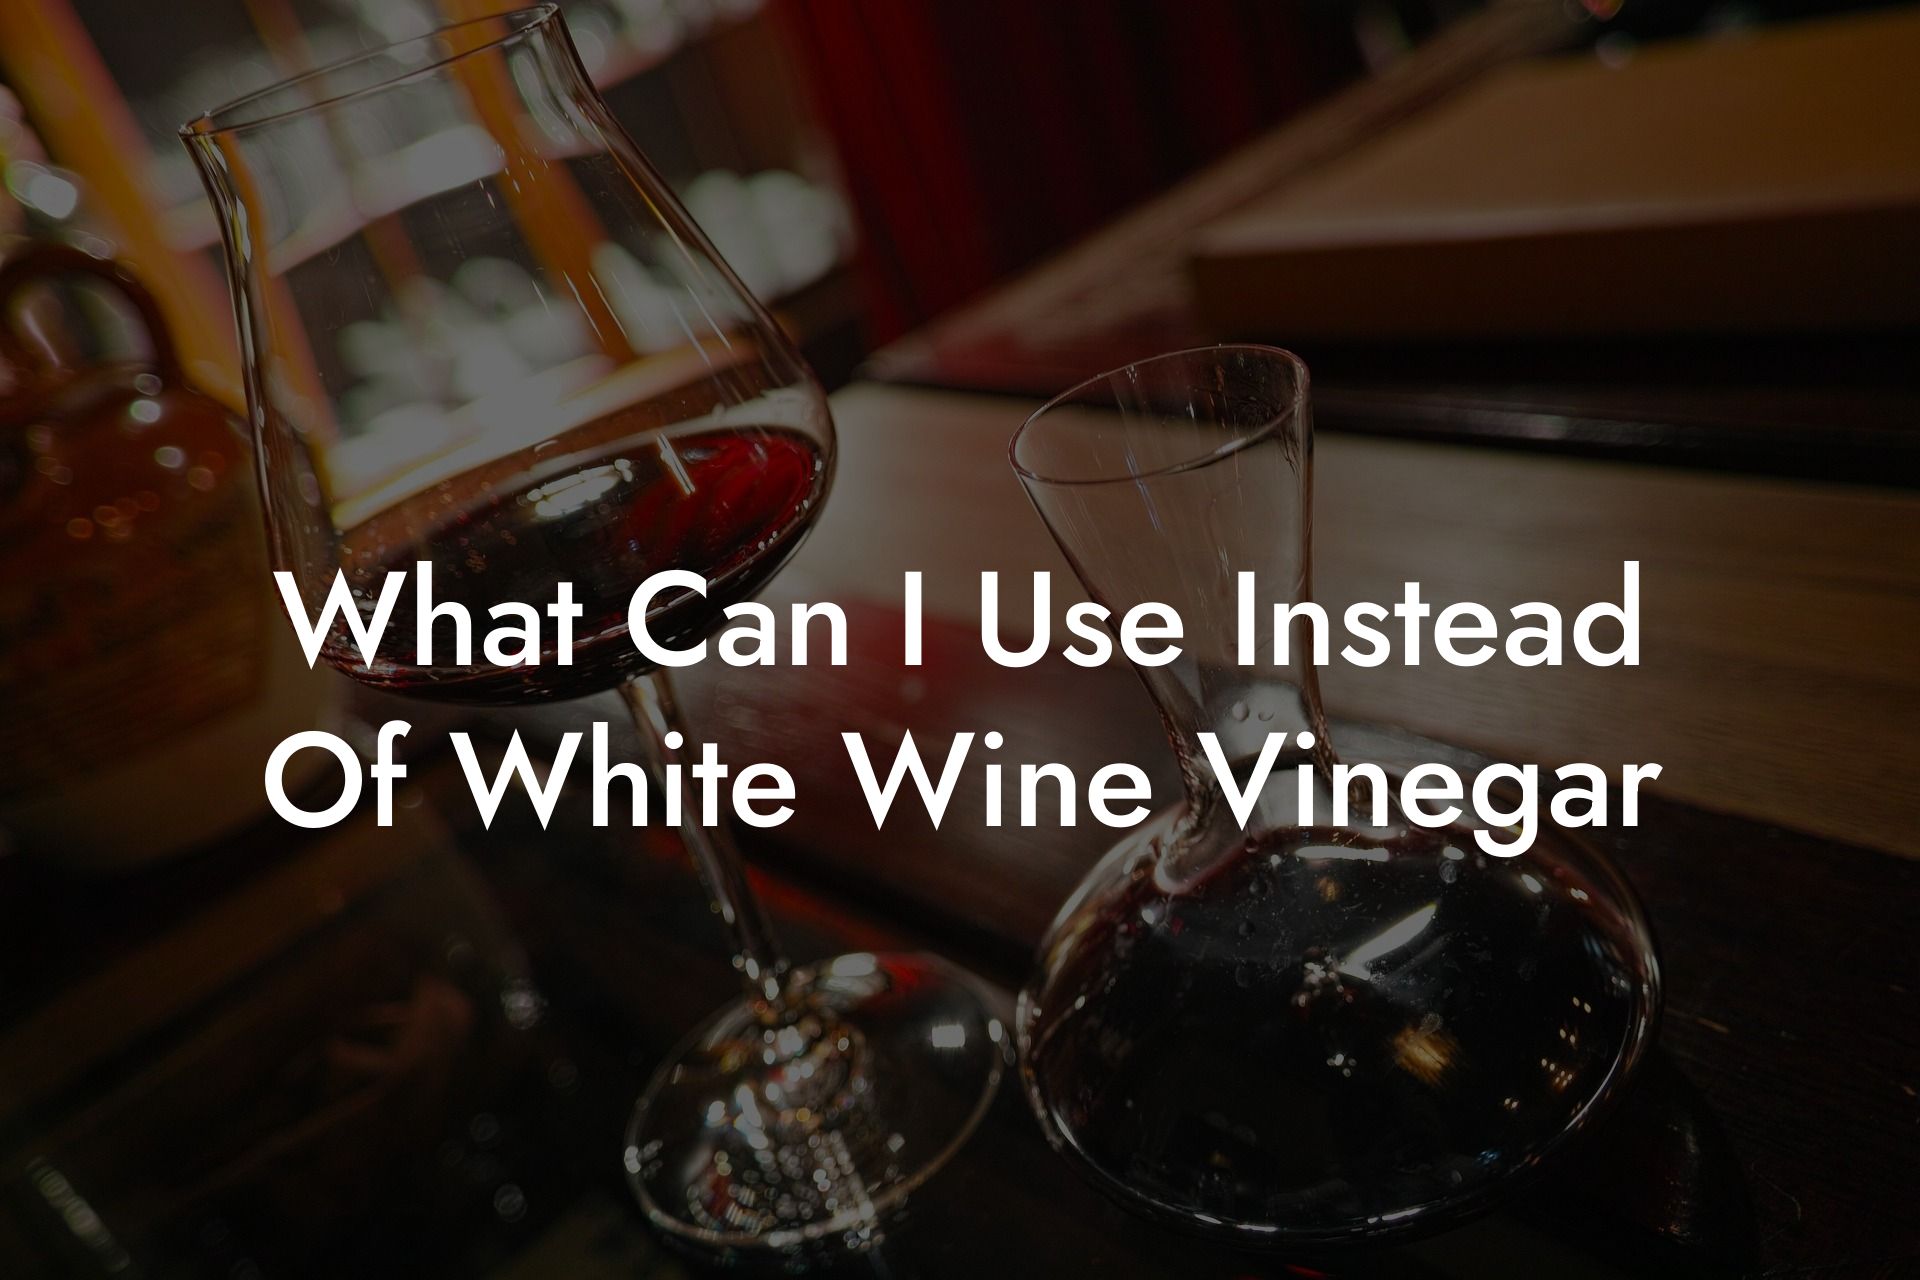 What Can I Use Instead Of White Wine Vinegar